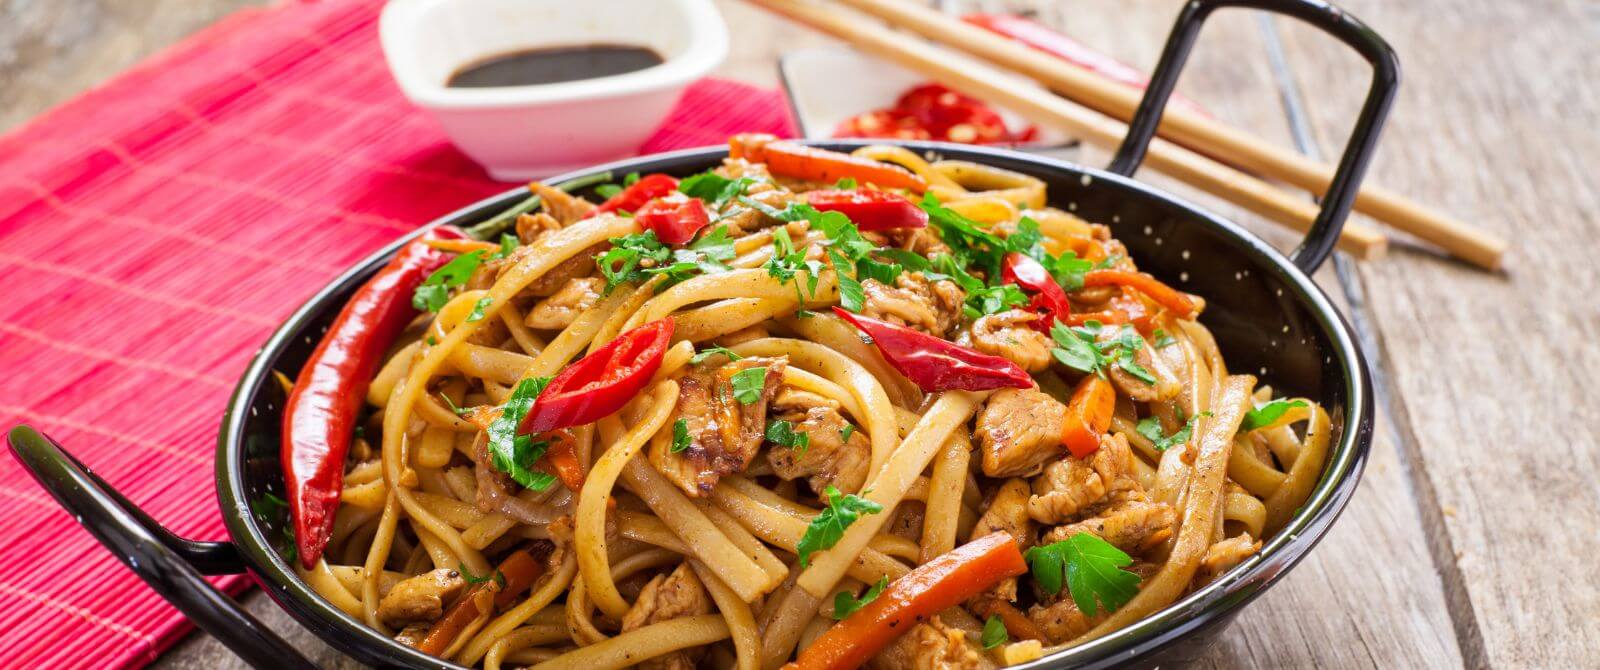 a wok full of noodles, peppers and vegetables with chopsticks and a bowl of soy sauce on the side